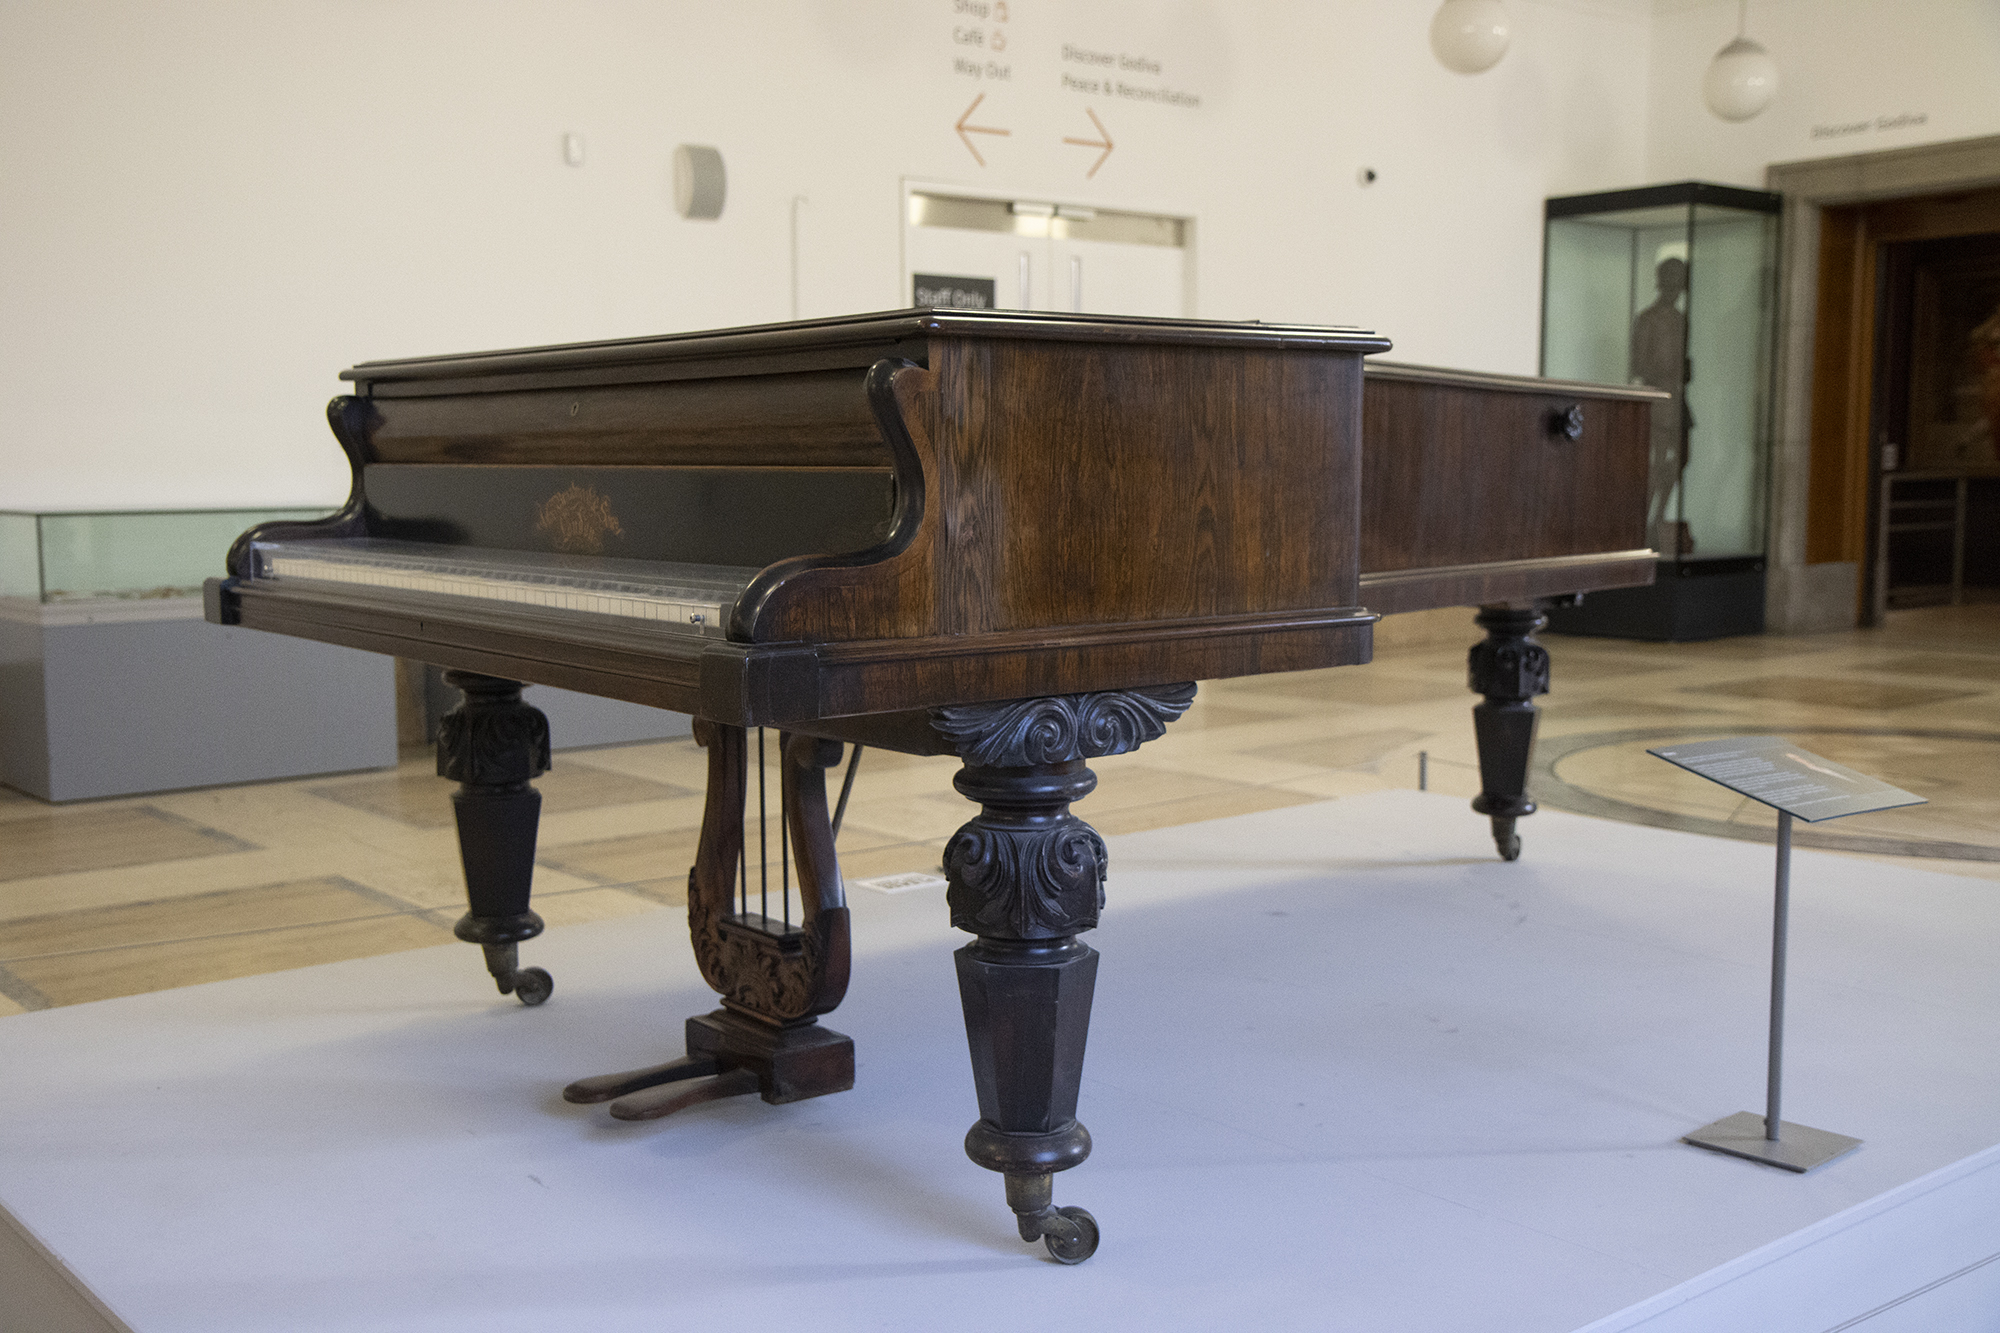 A photograph of George Eliot's grand piano, on display in the Herbert Art Gallery & Museum foyer. It's made from dark wood with elegant swirled carvings on the legs. The pedals are attached to a harp-like carved design underneath the piano. Above the keys is the manufacturer's name.